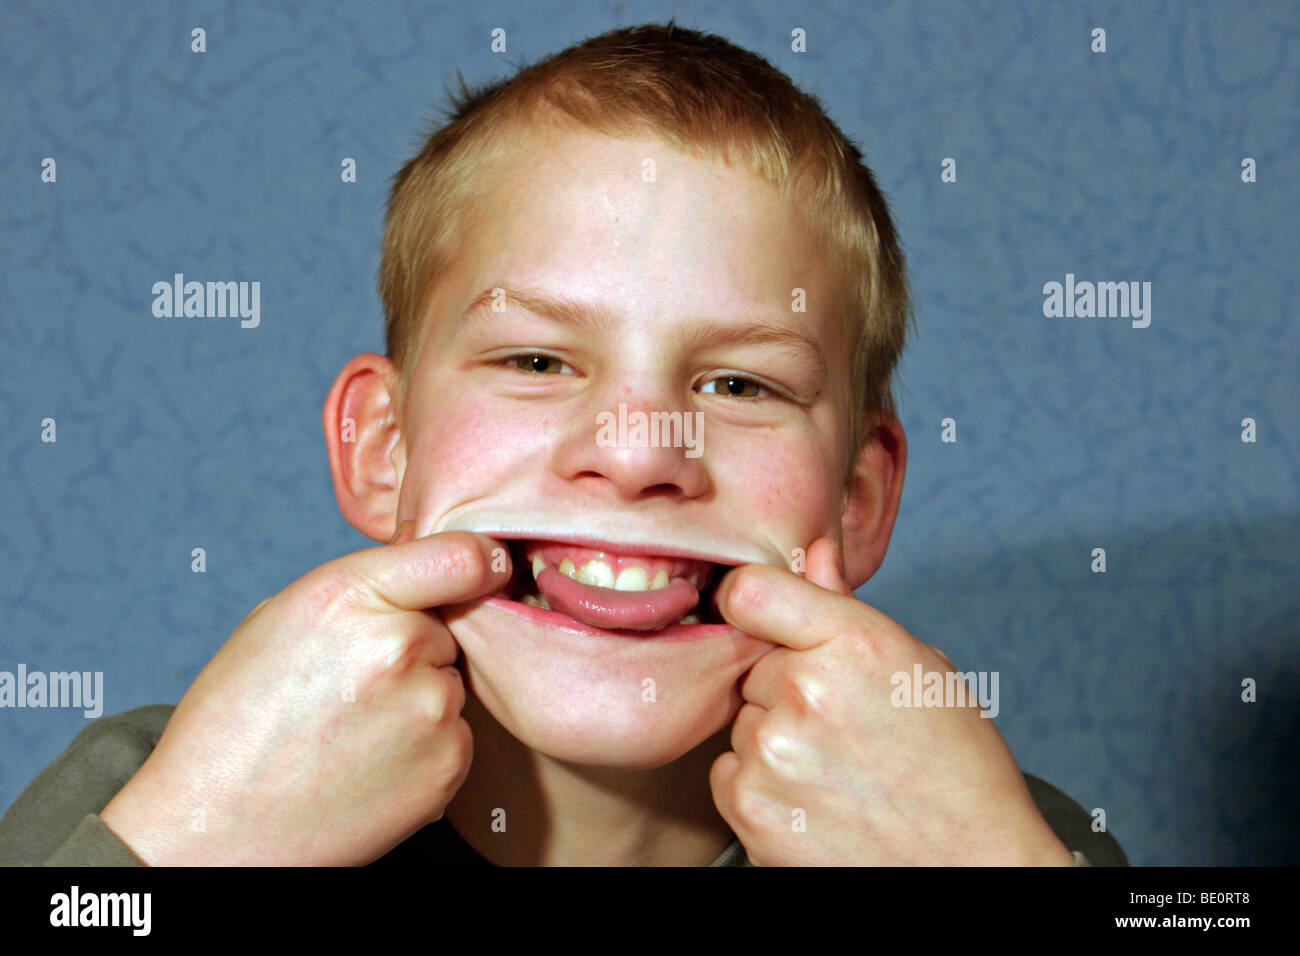 young boy making a grimace Stock Photo